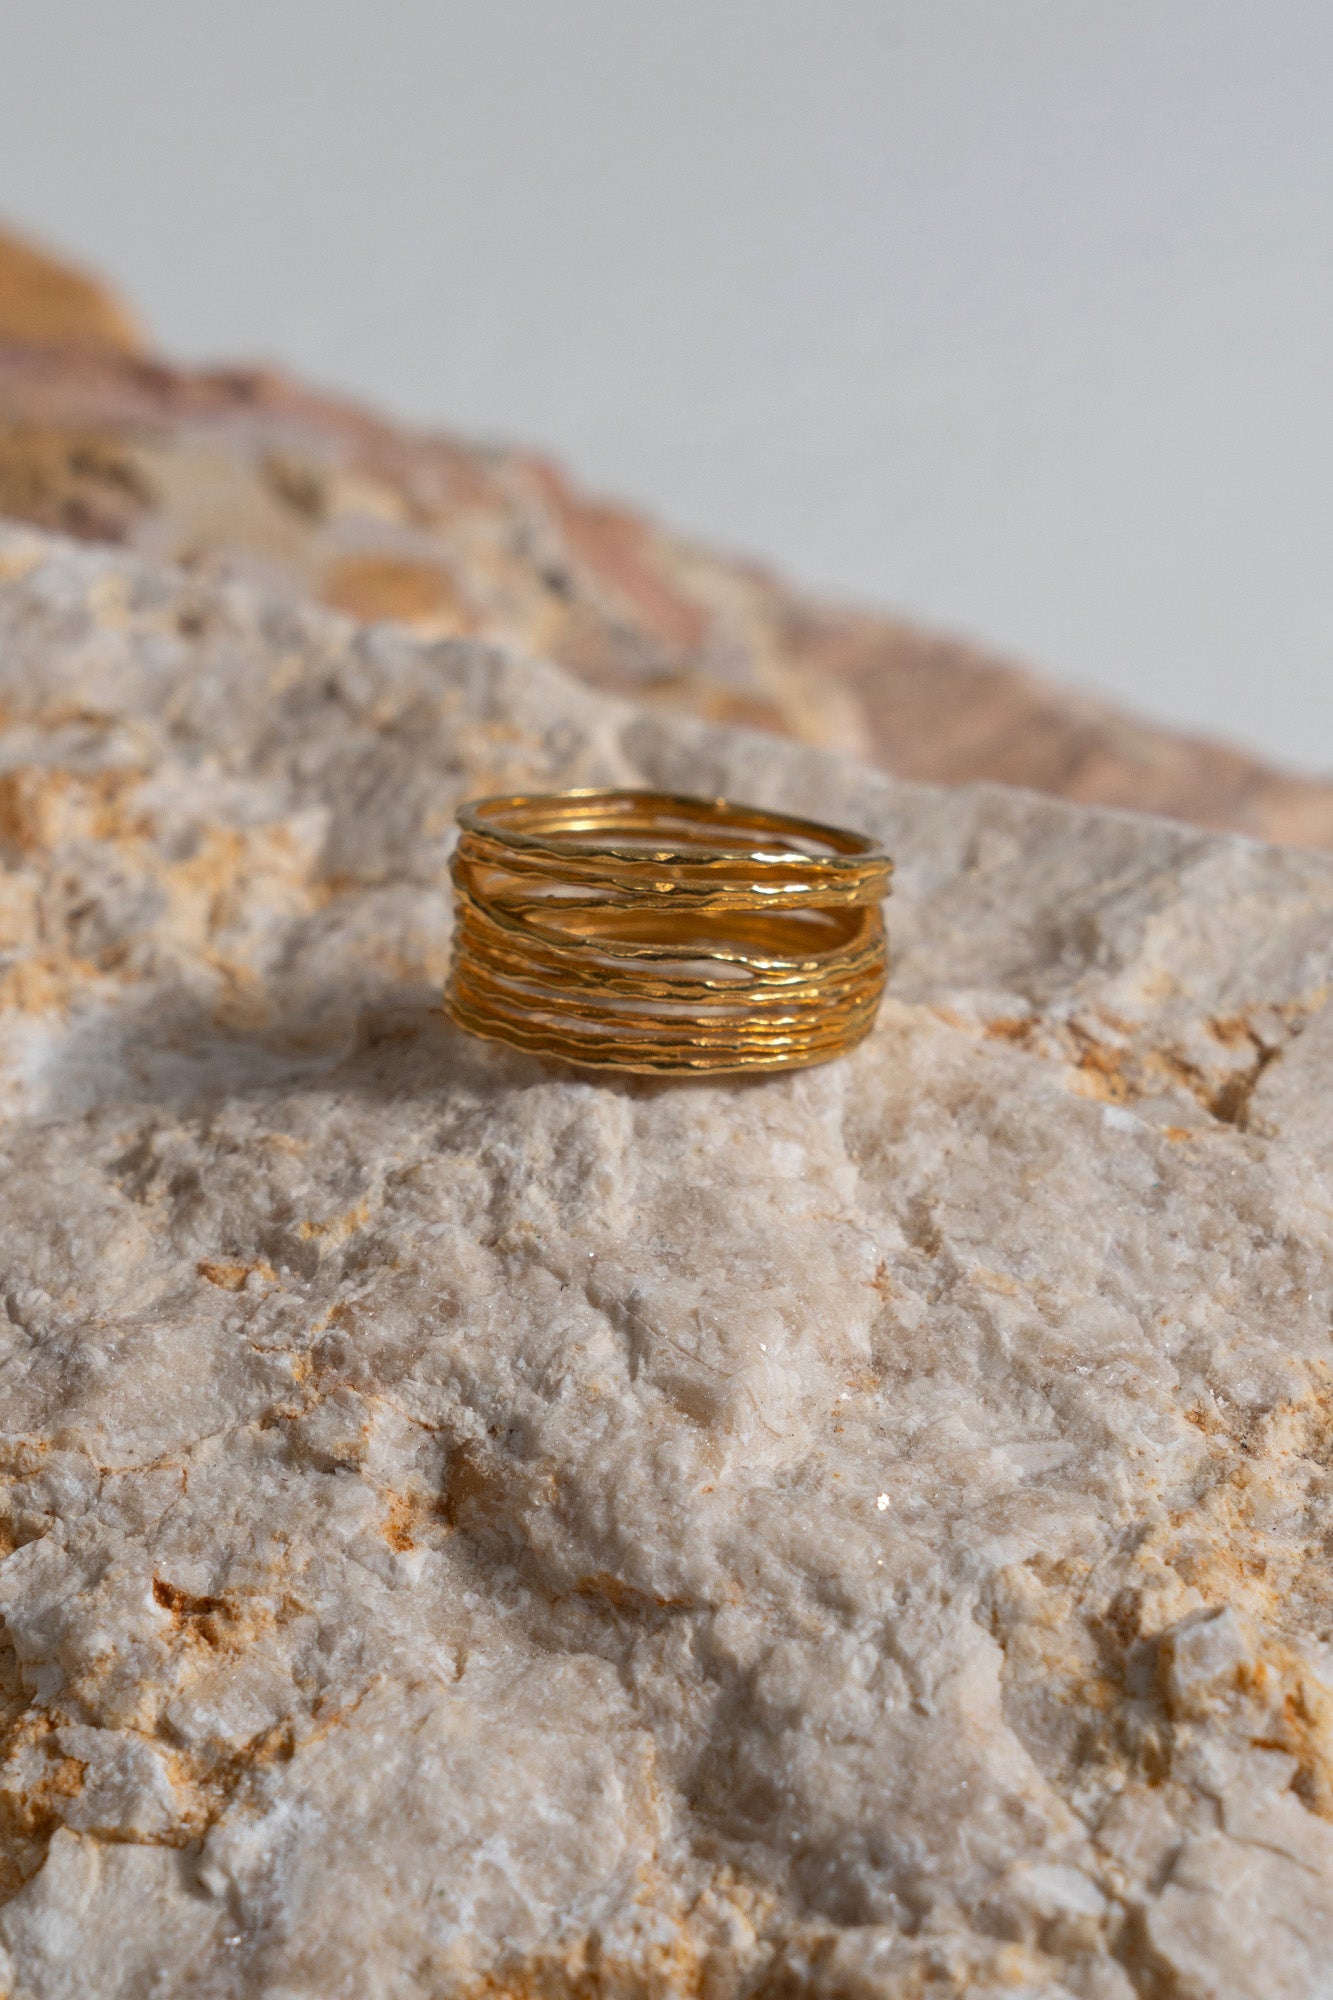 The Woven Cluster Ring